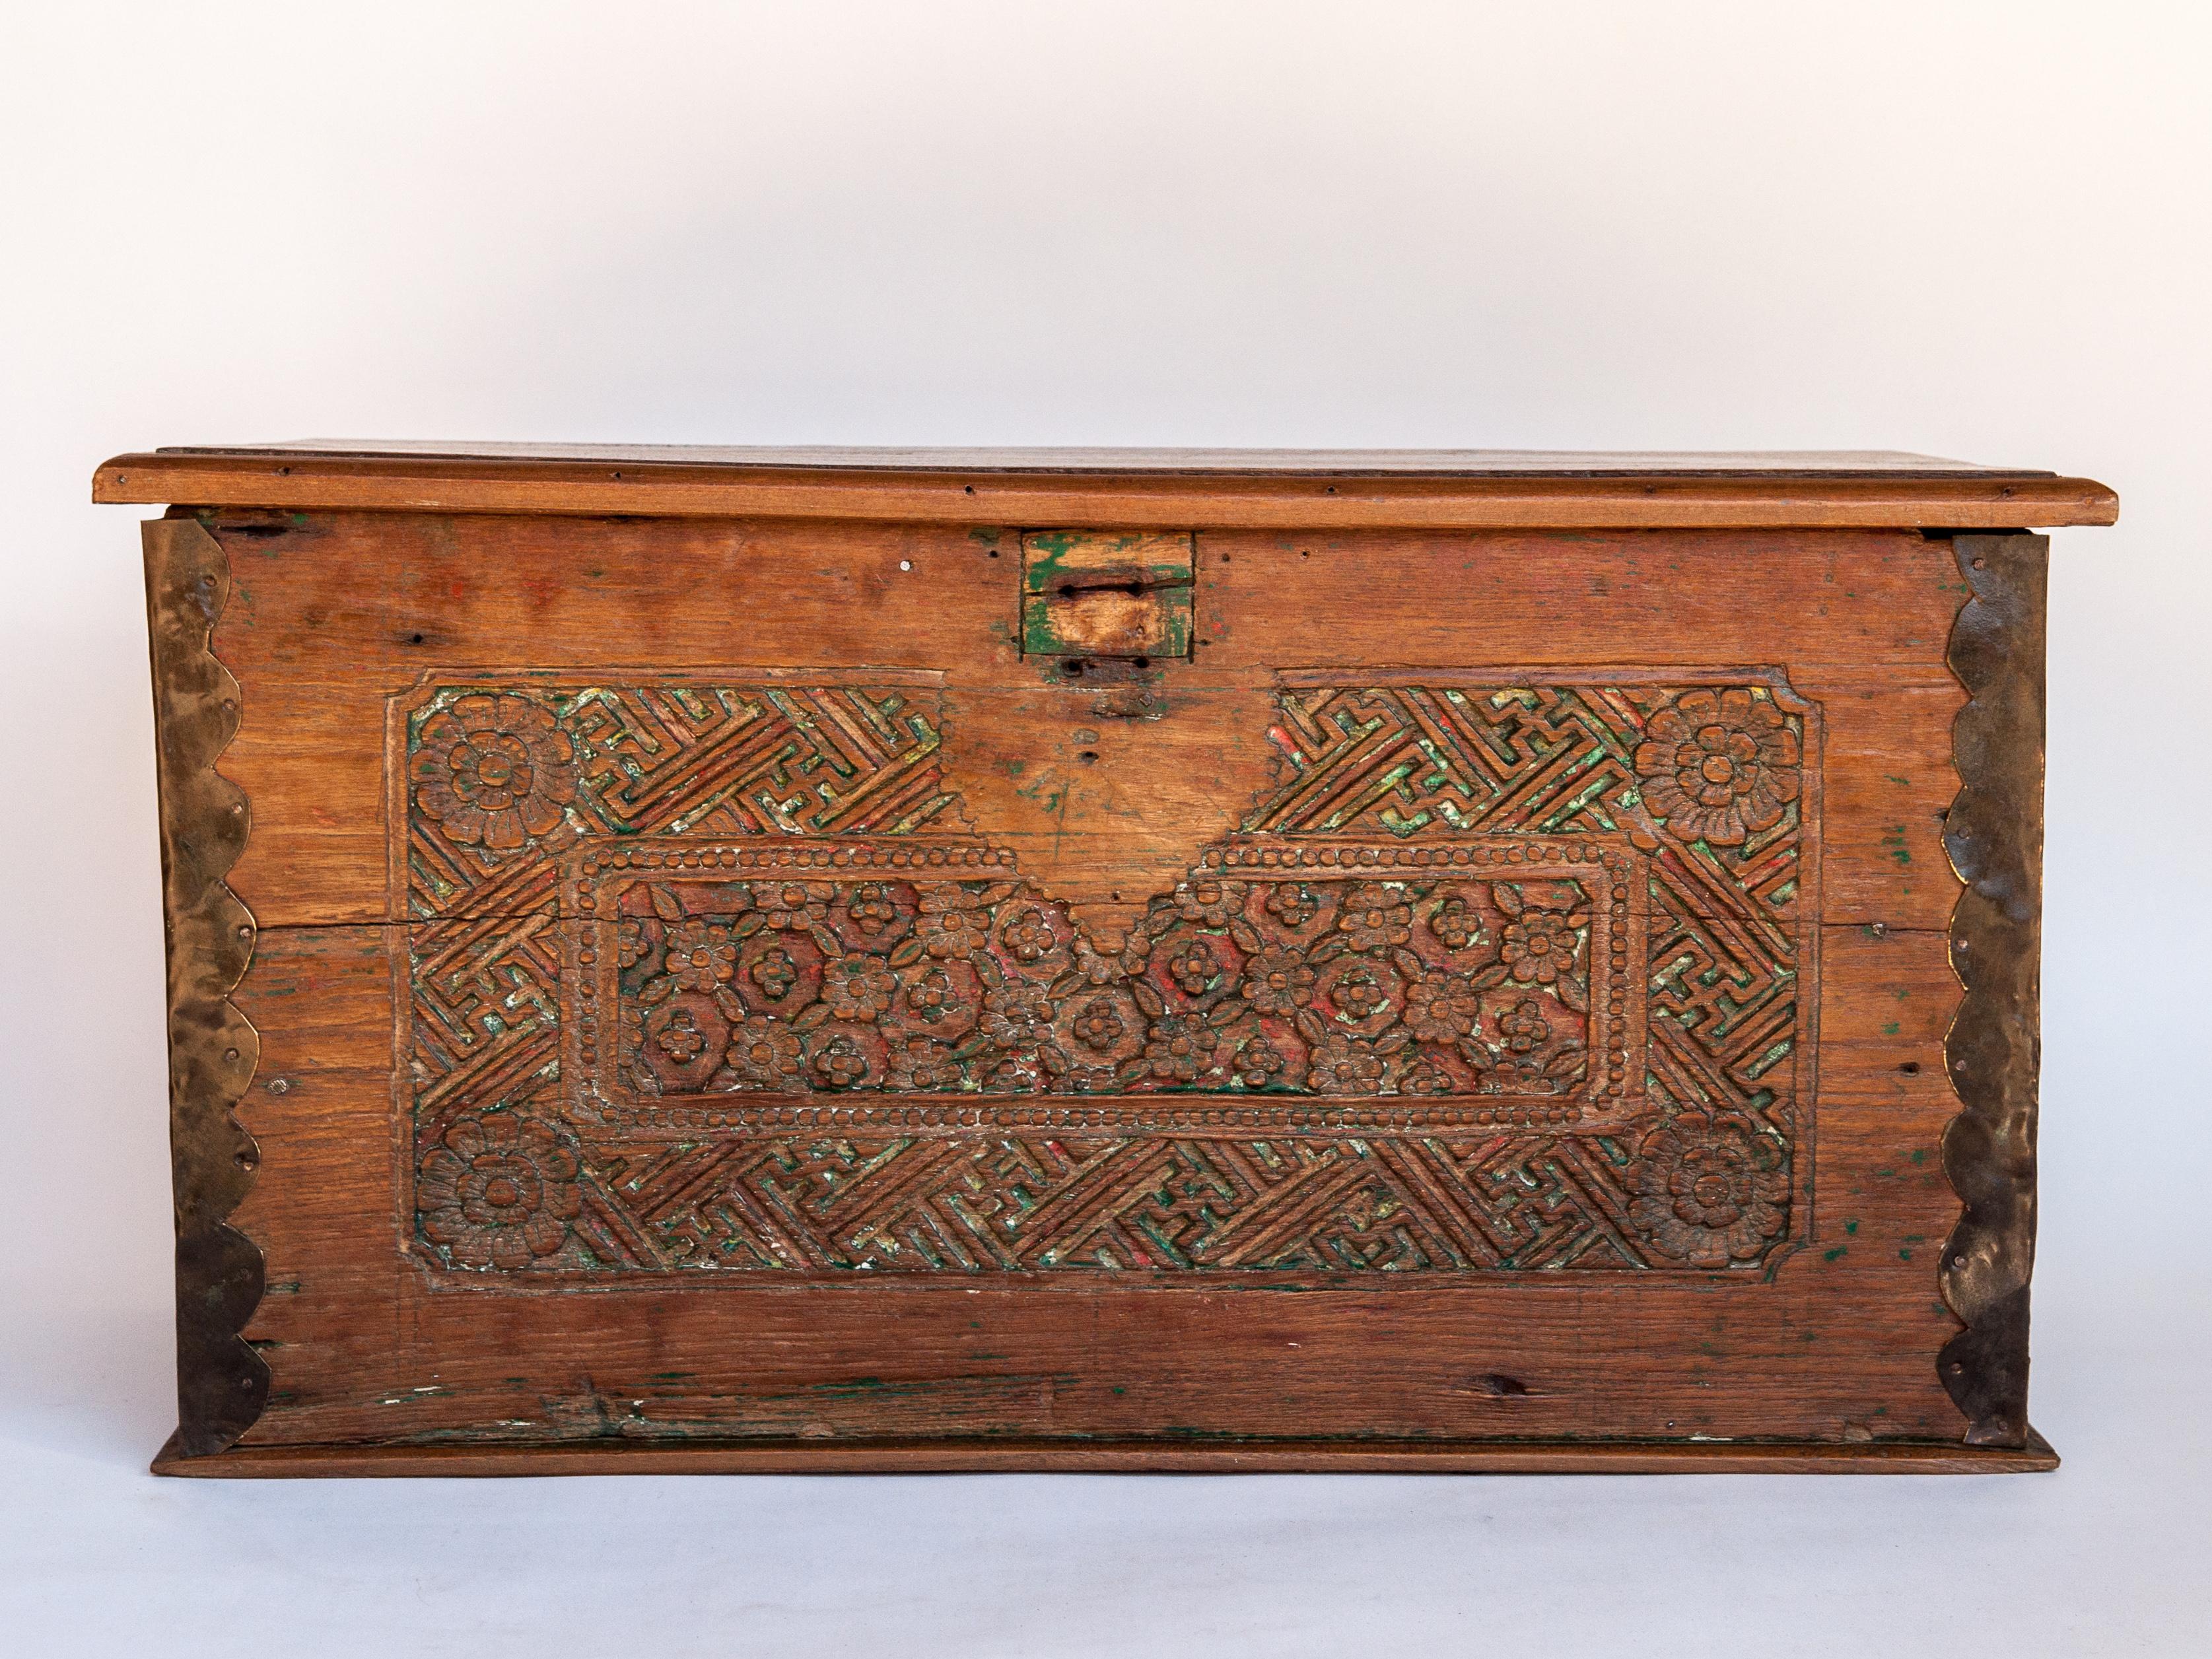 Country Vintage Teak Storage Chest with Carved Design from Java, Mid-20th Century